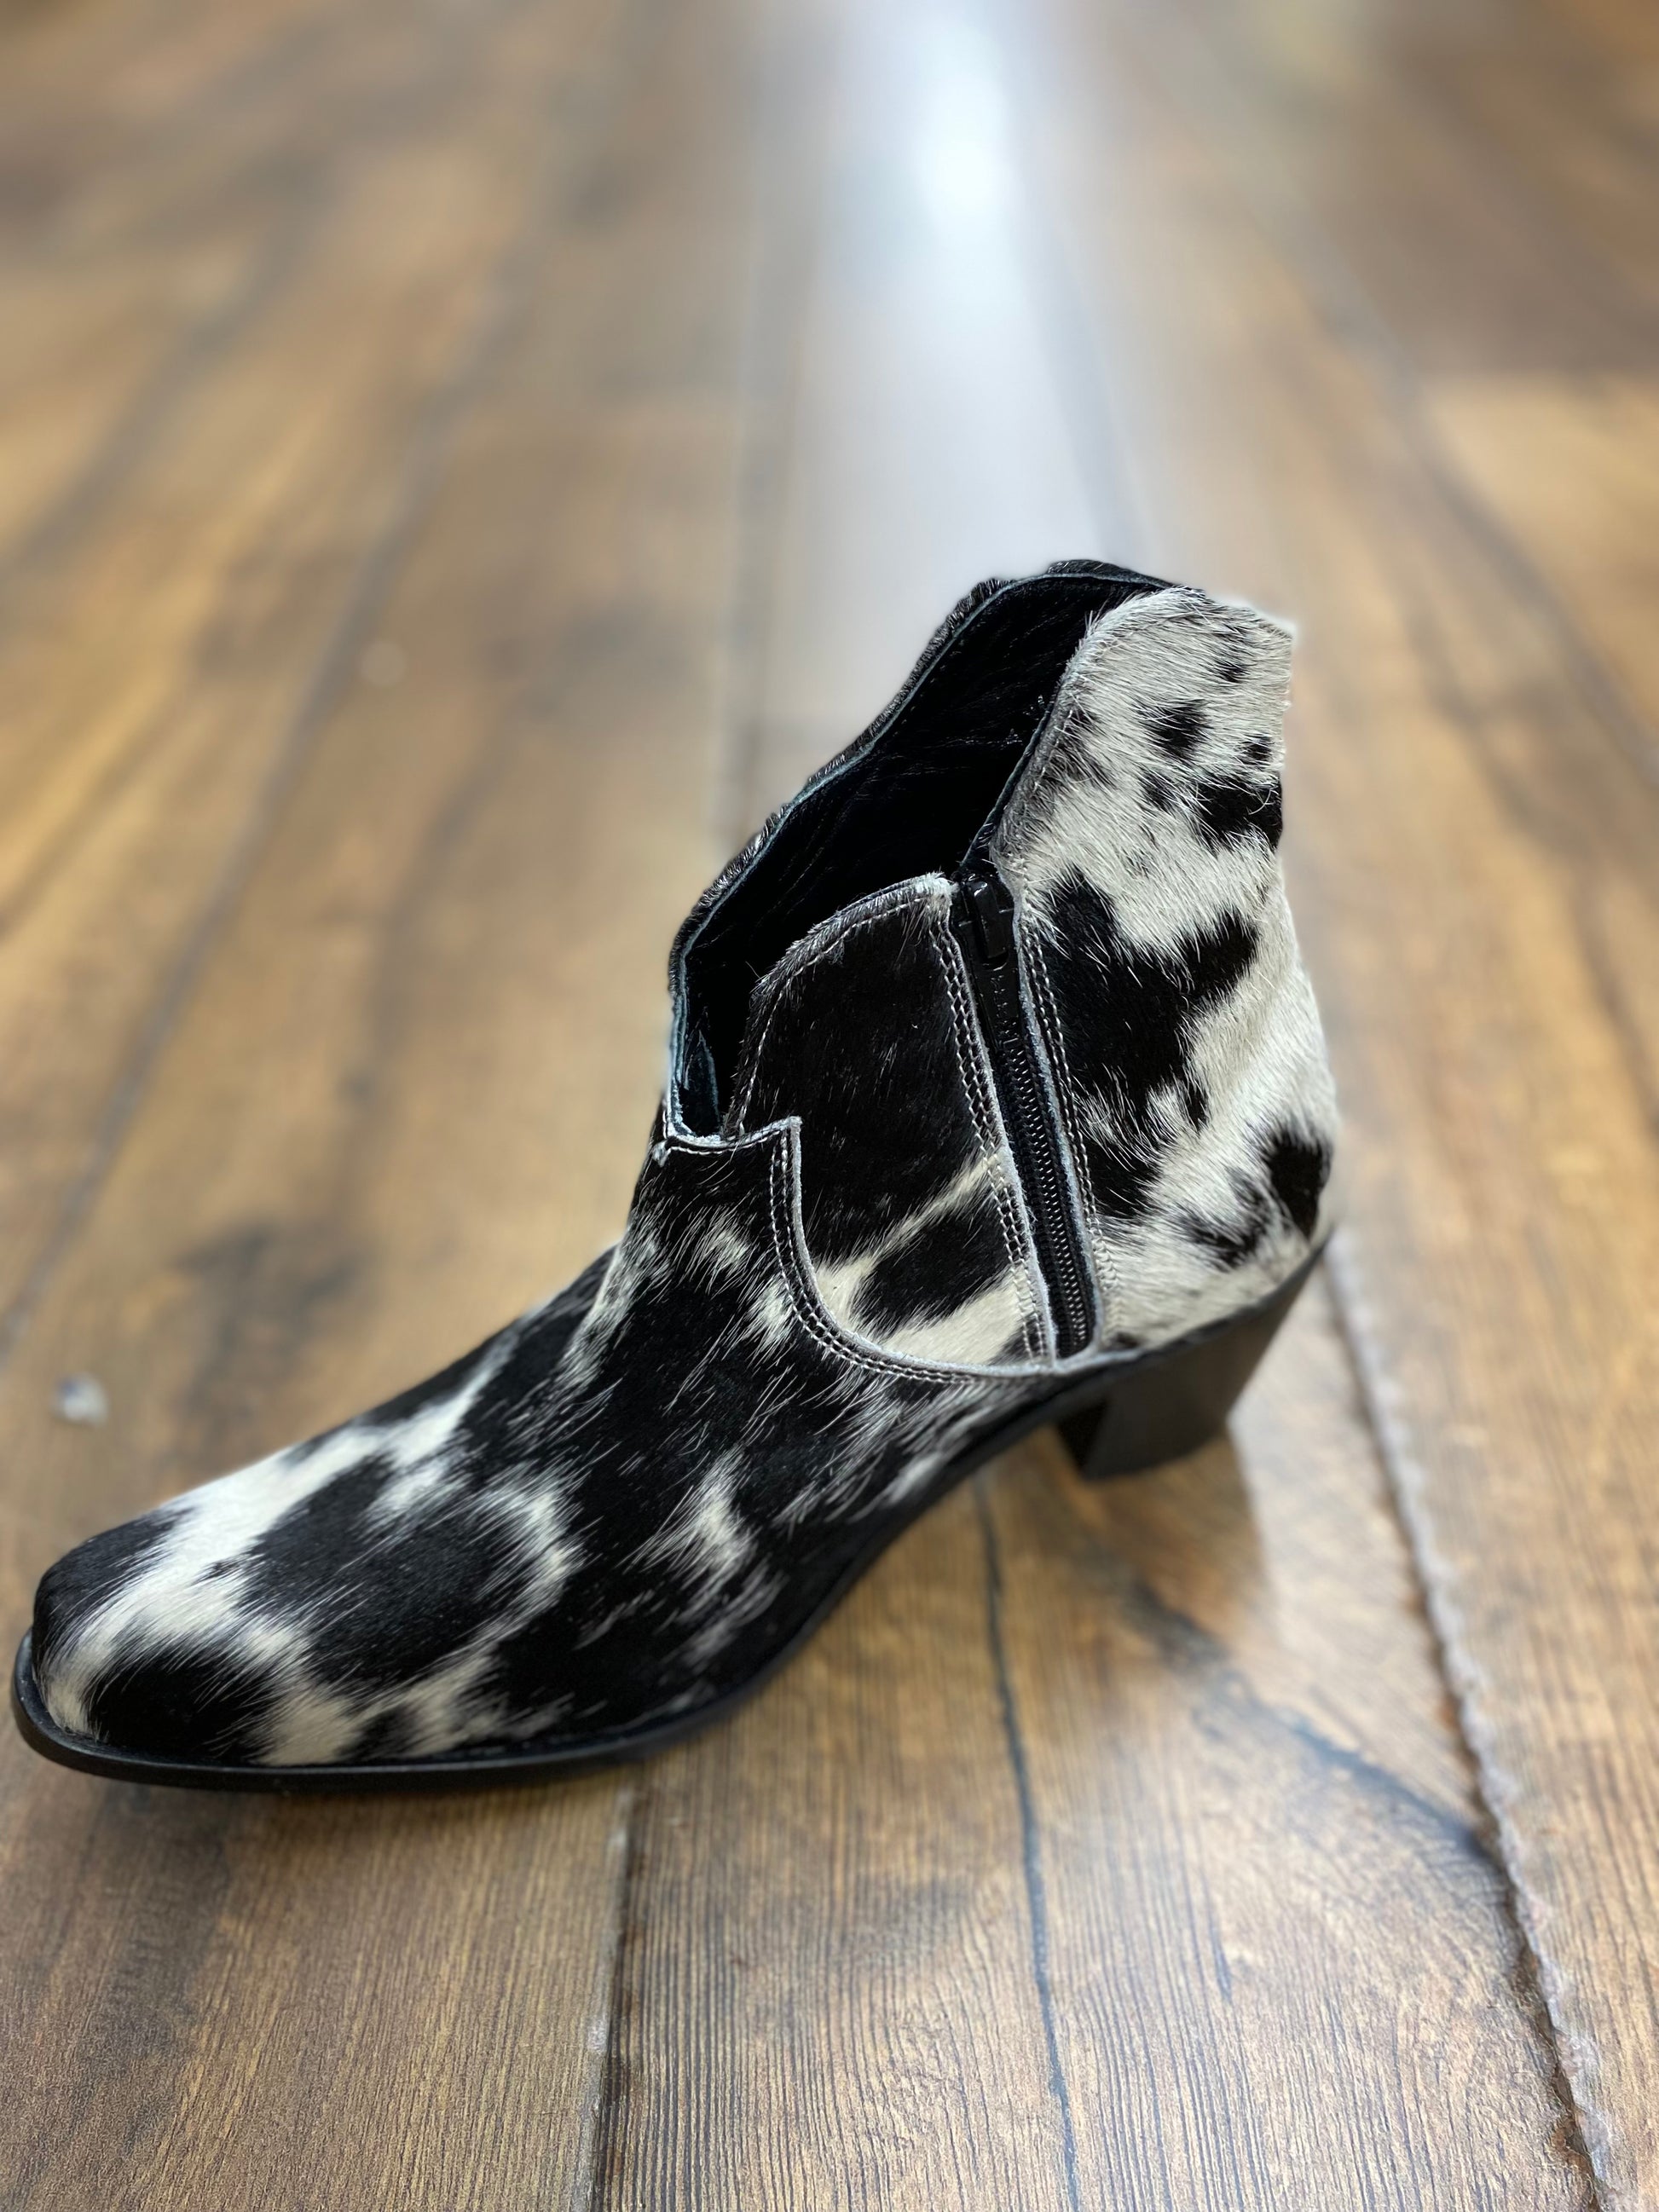 Agave sky hair on hide made in mexico ankle boots